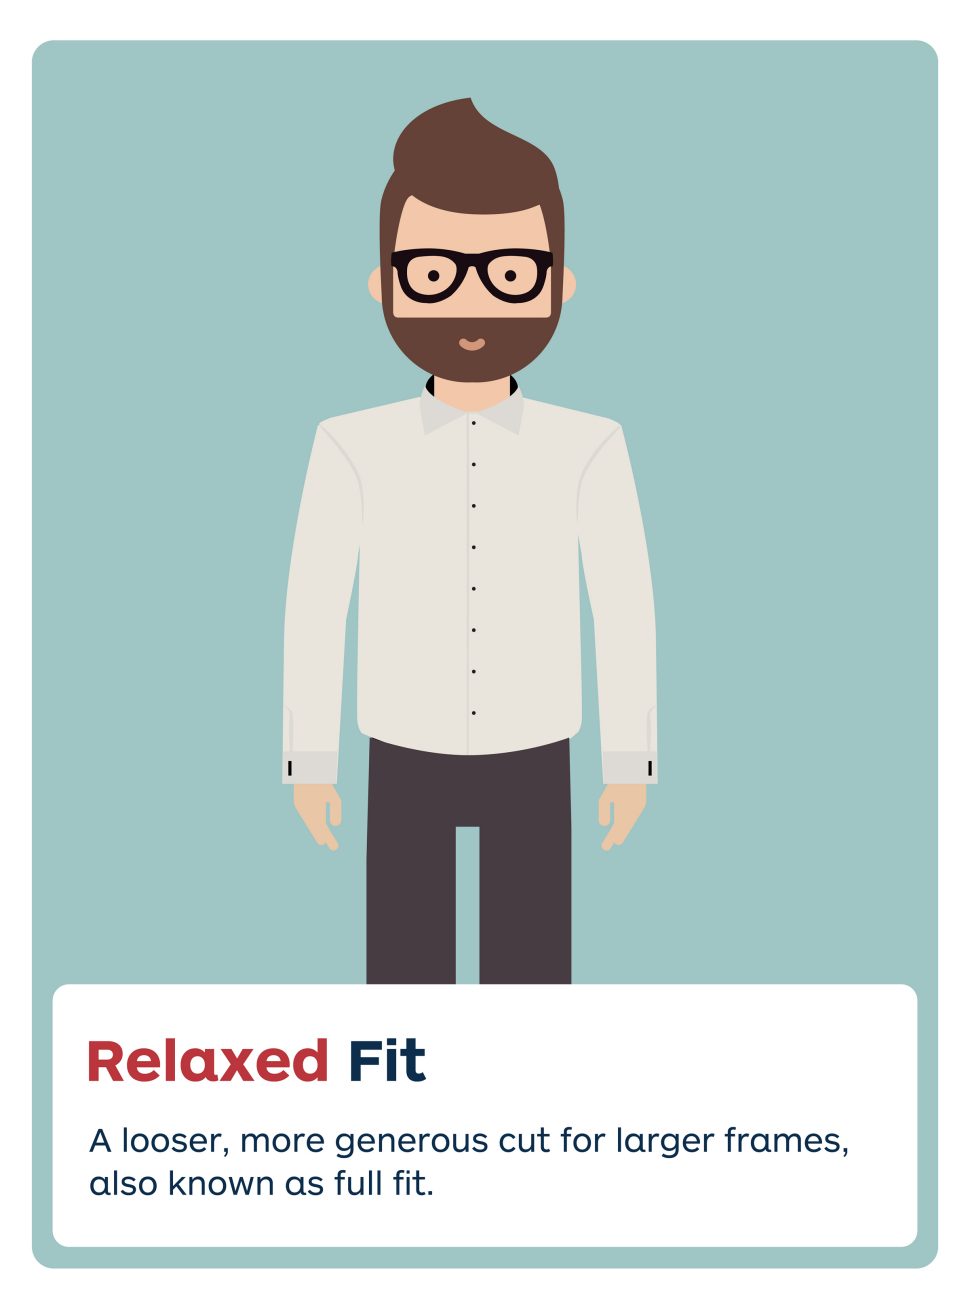 Relaxed fit.
A looser, more generous cut for larger frames, also known as full fit.